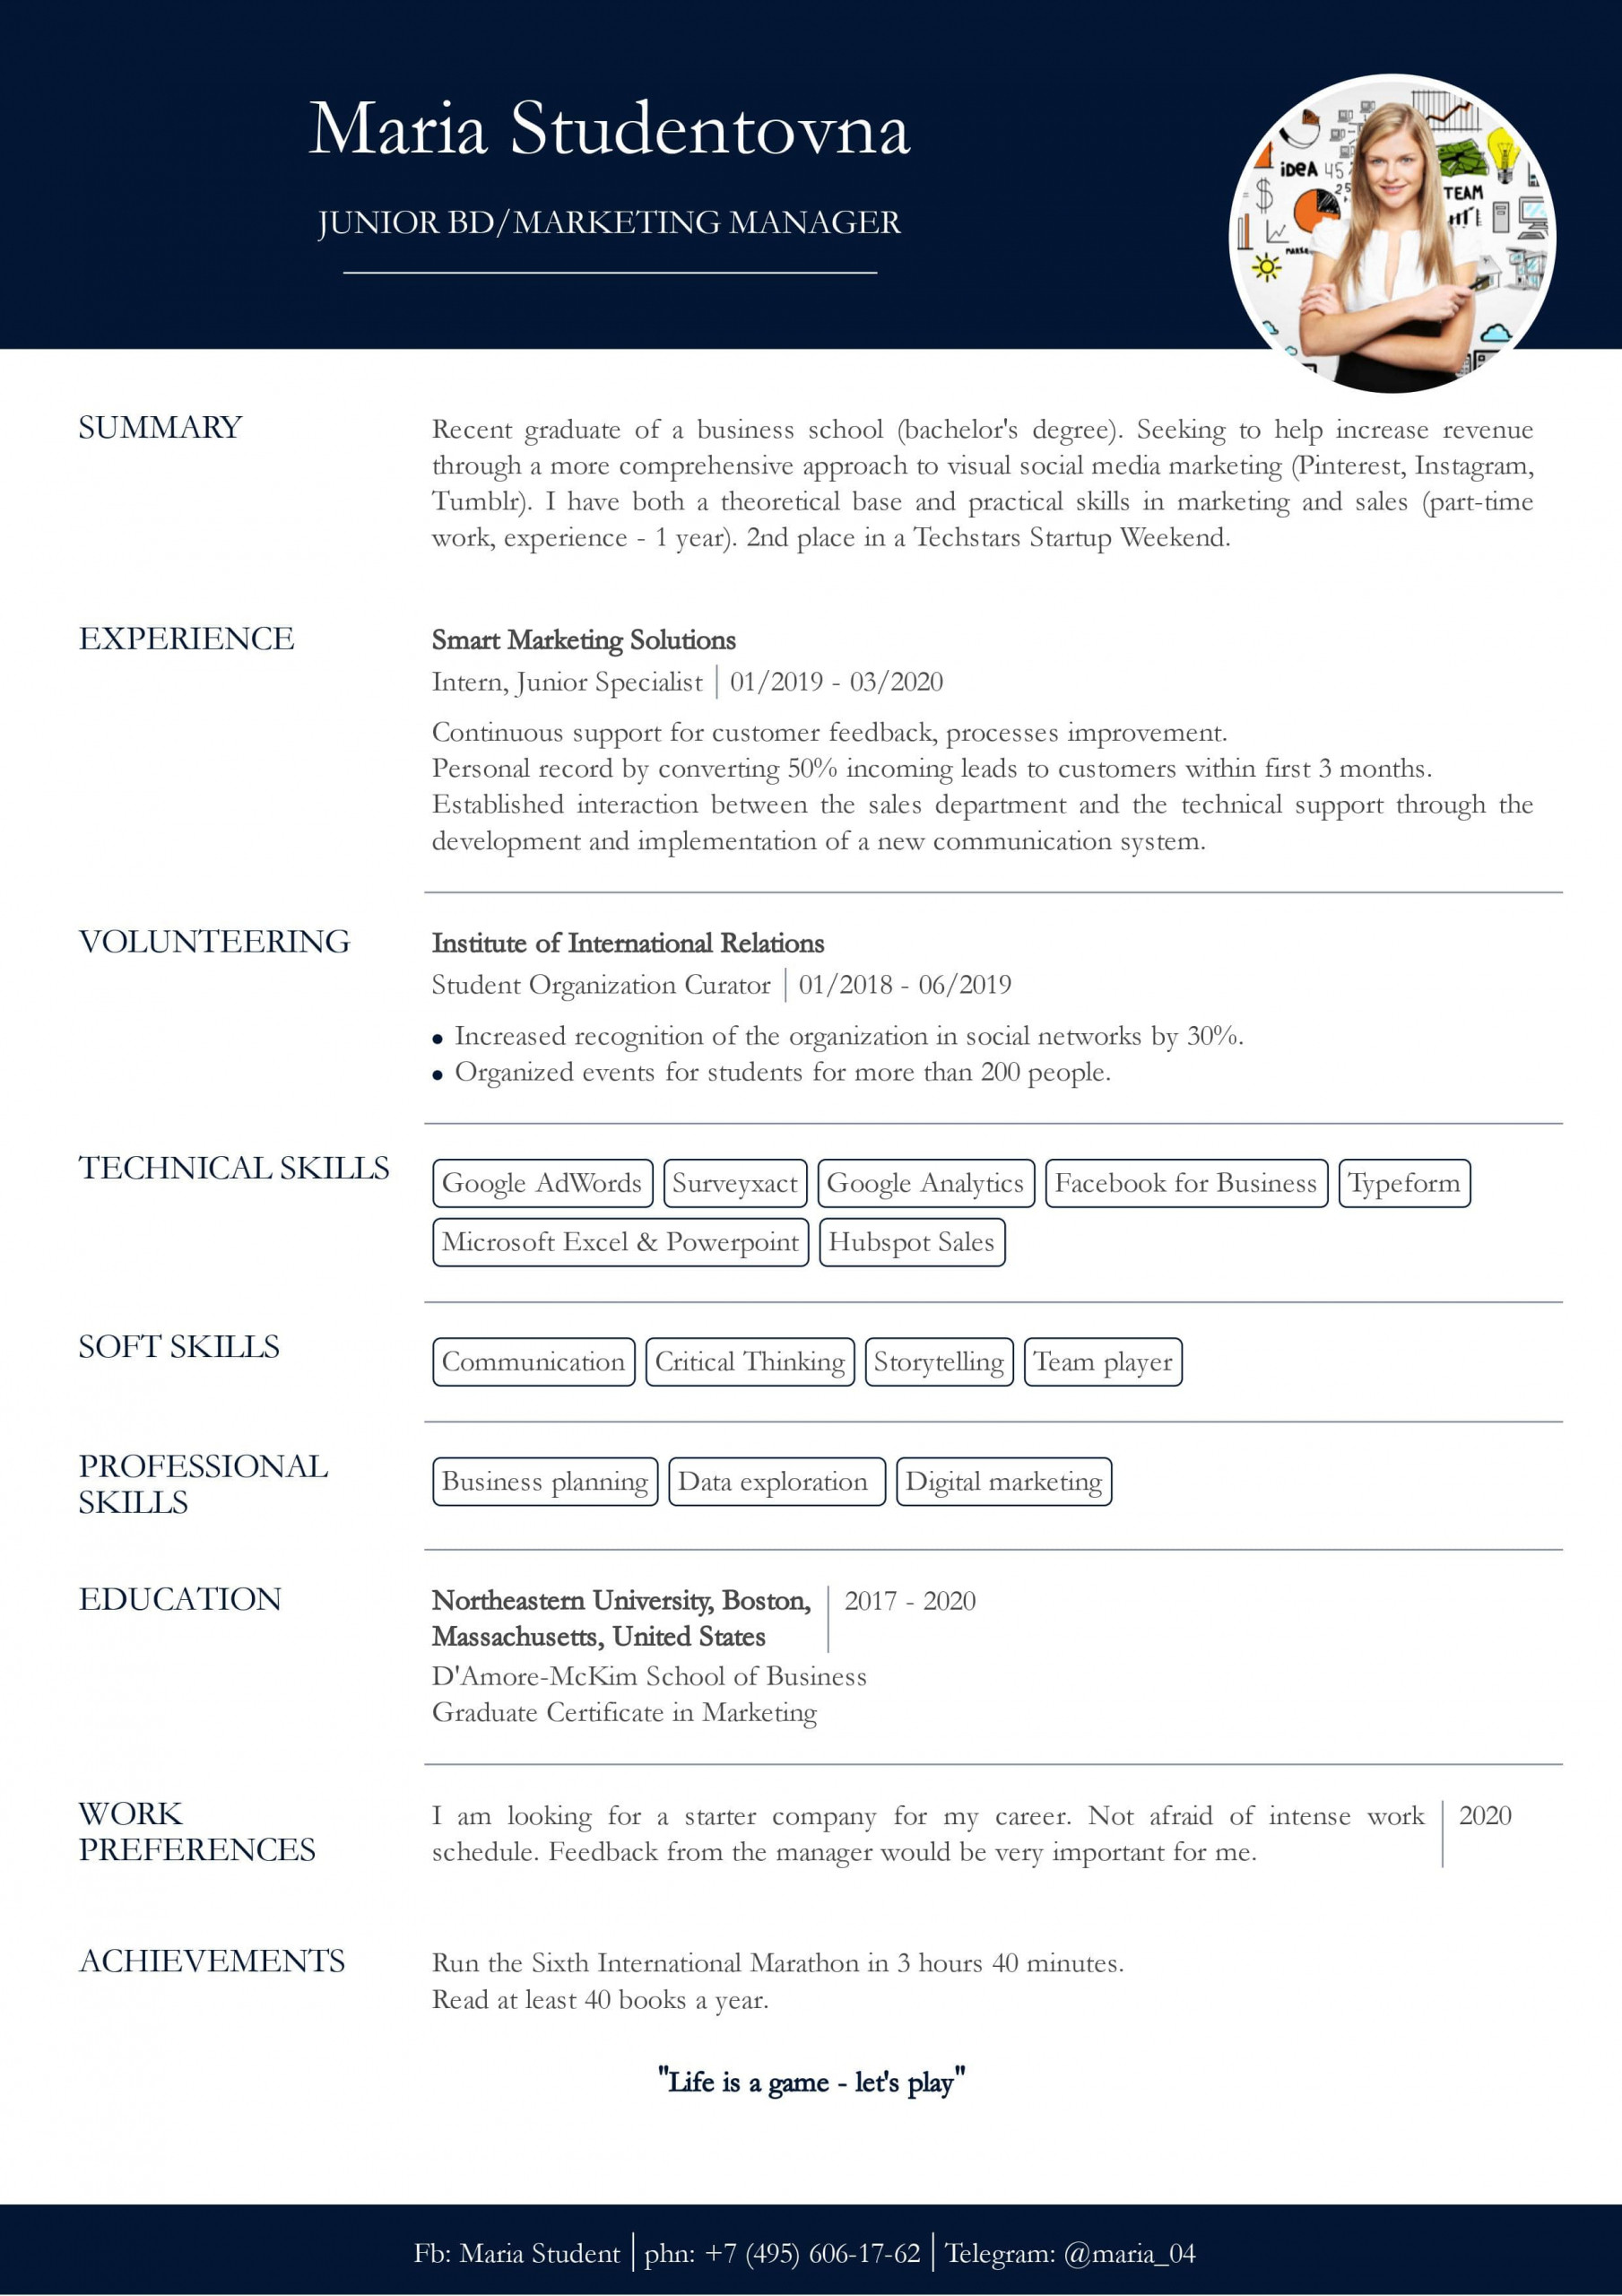 Sample Resume if You Have No Work Experience Resume with No Work Experience. Sample for Students. – Cv2you Blog